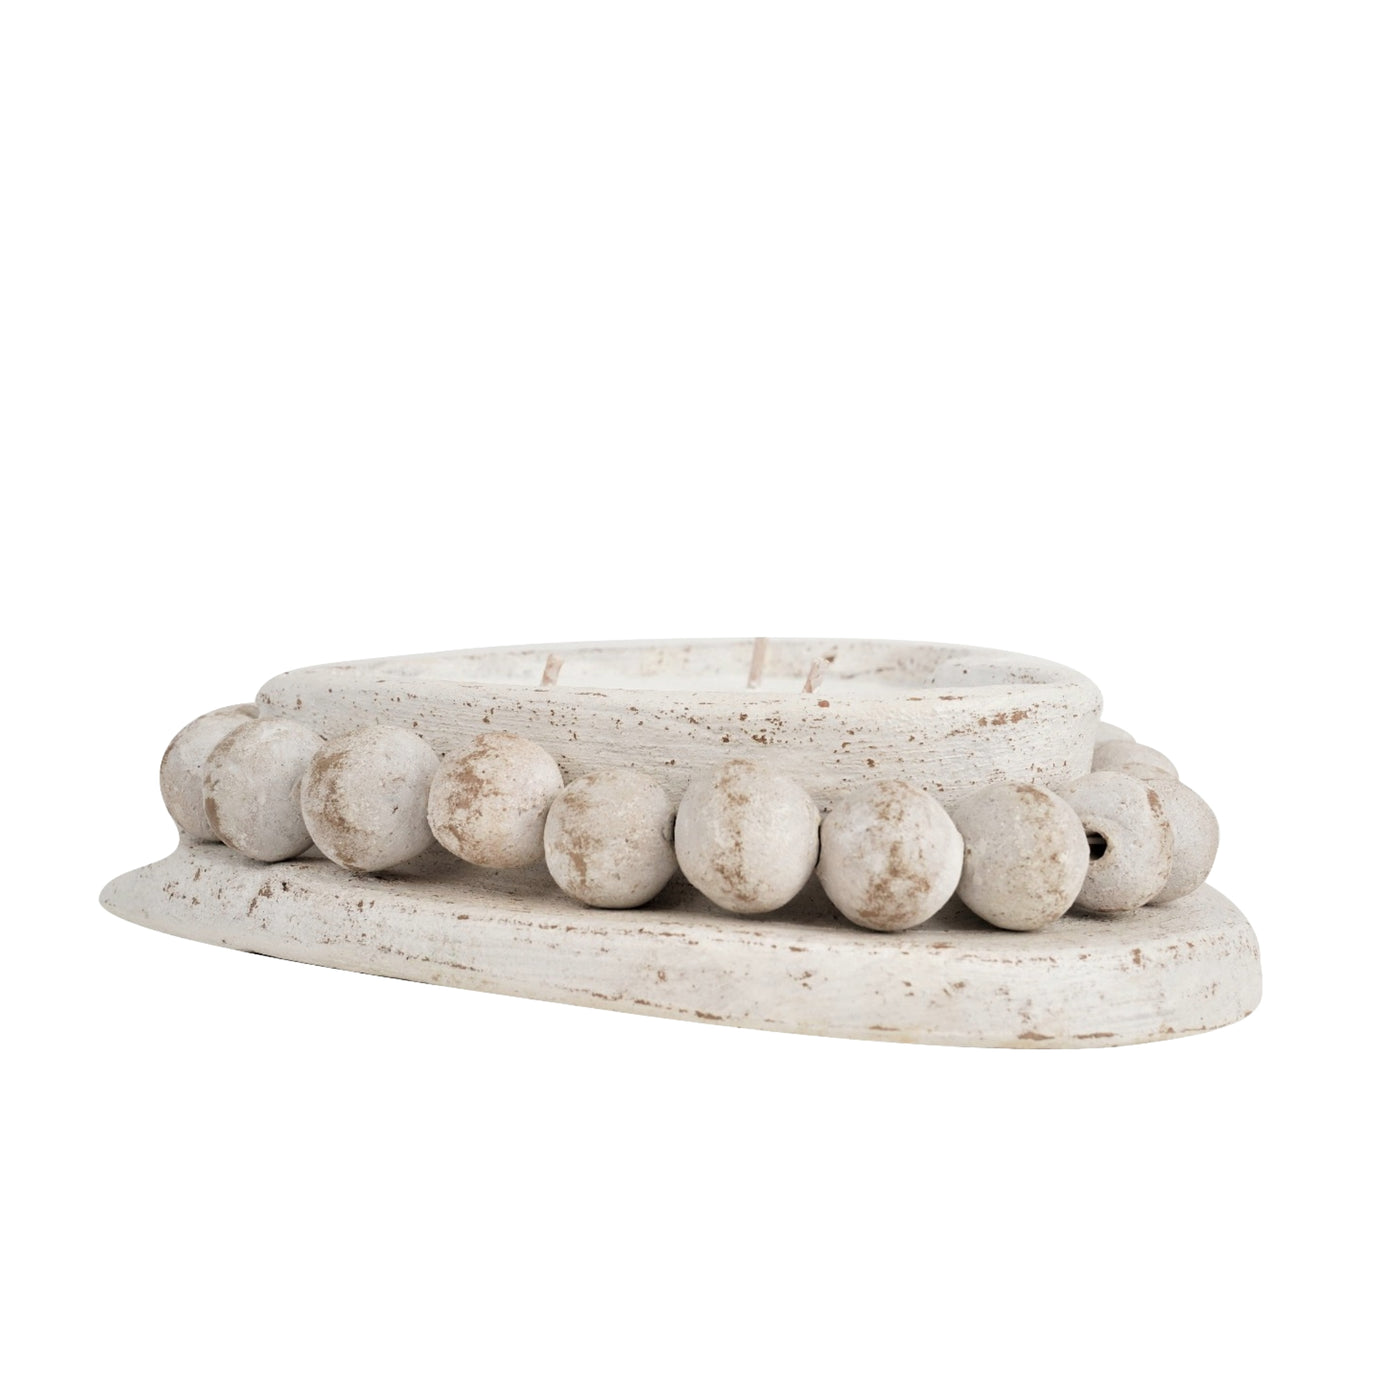 Distressed White candle holder: is made from clay, heart shaped with removeable beads. Use it as a vessel for candle making or use alone as décor. Side View